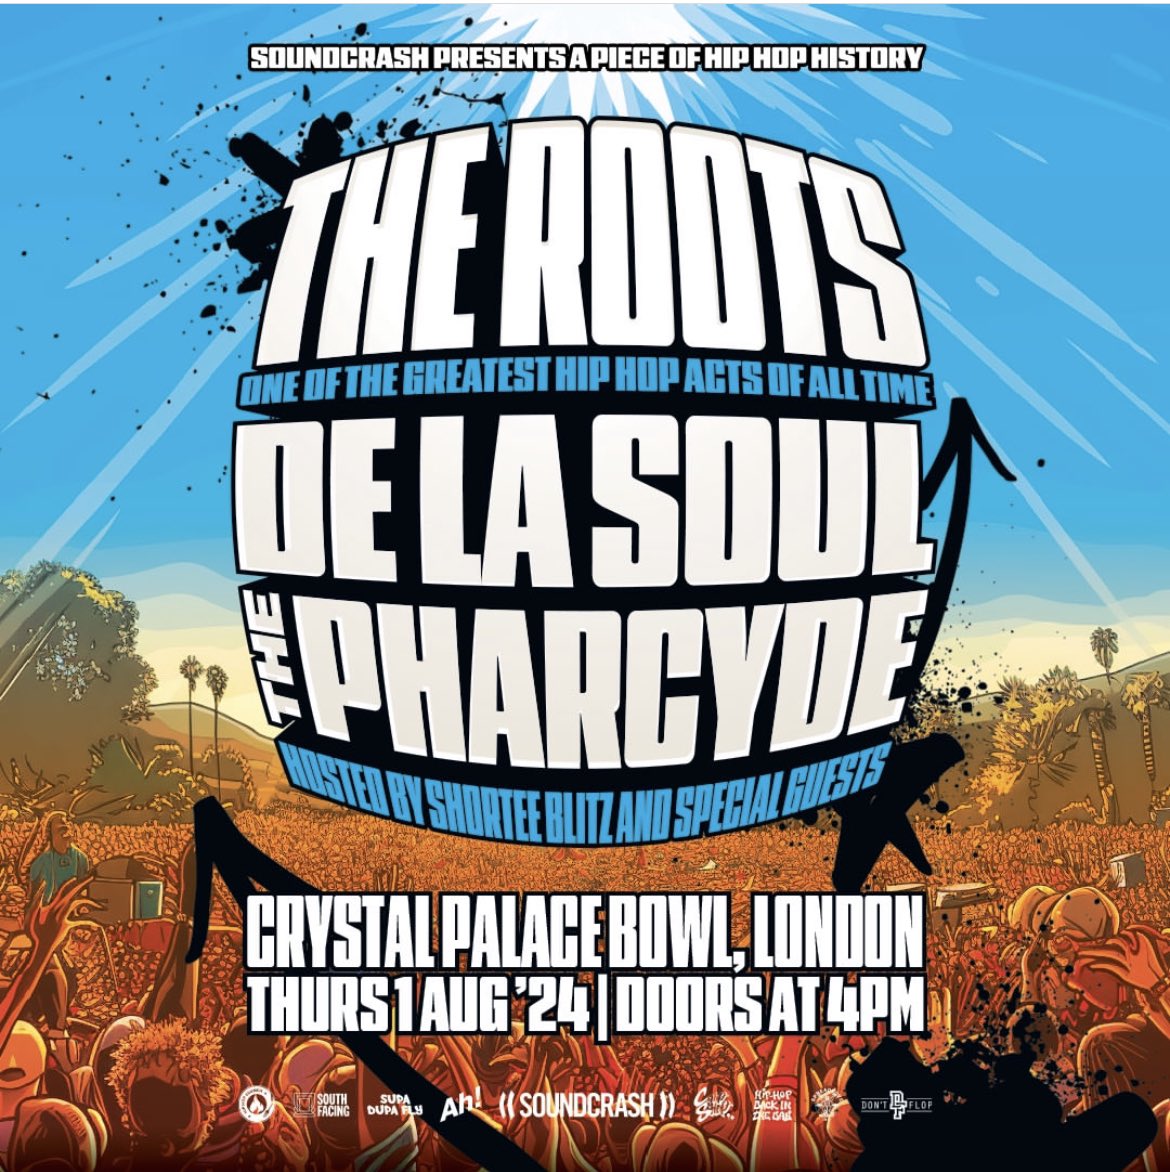 👊🏻 One of the greatest hip-hop acts of all time is coming to the Bowl! Join @theroots, with @WeAreDeLaSoul, @thepharcyde and special guests for an epic day in Crystal Palace Park on Thu 1st August. 🎟️ Tickets via @SouthFacingFest